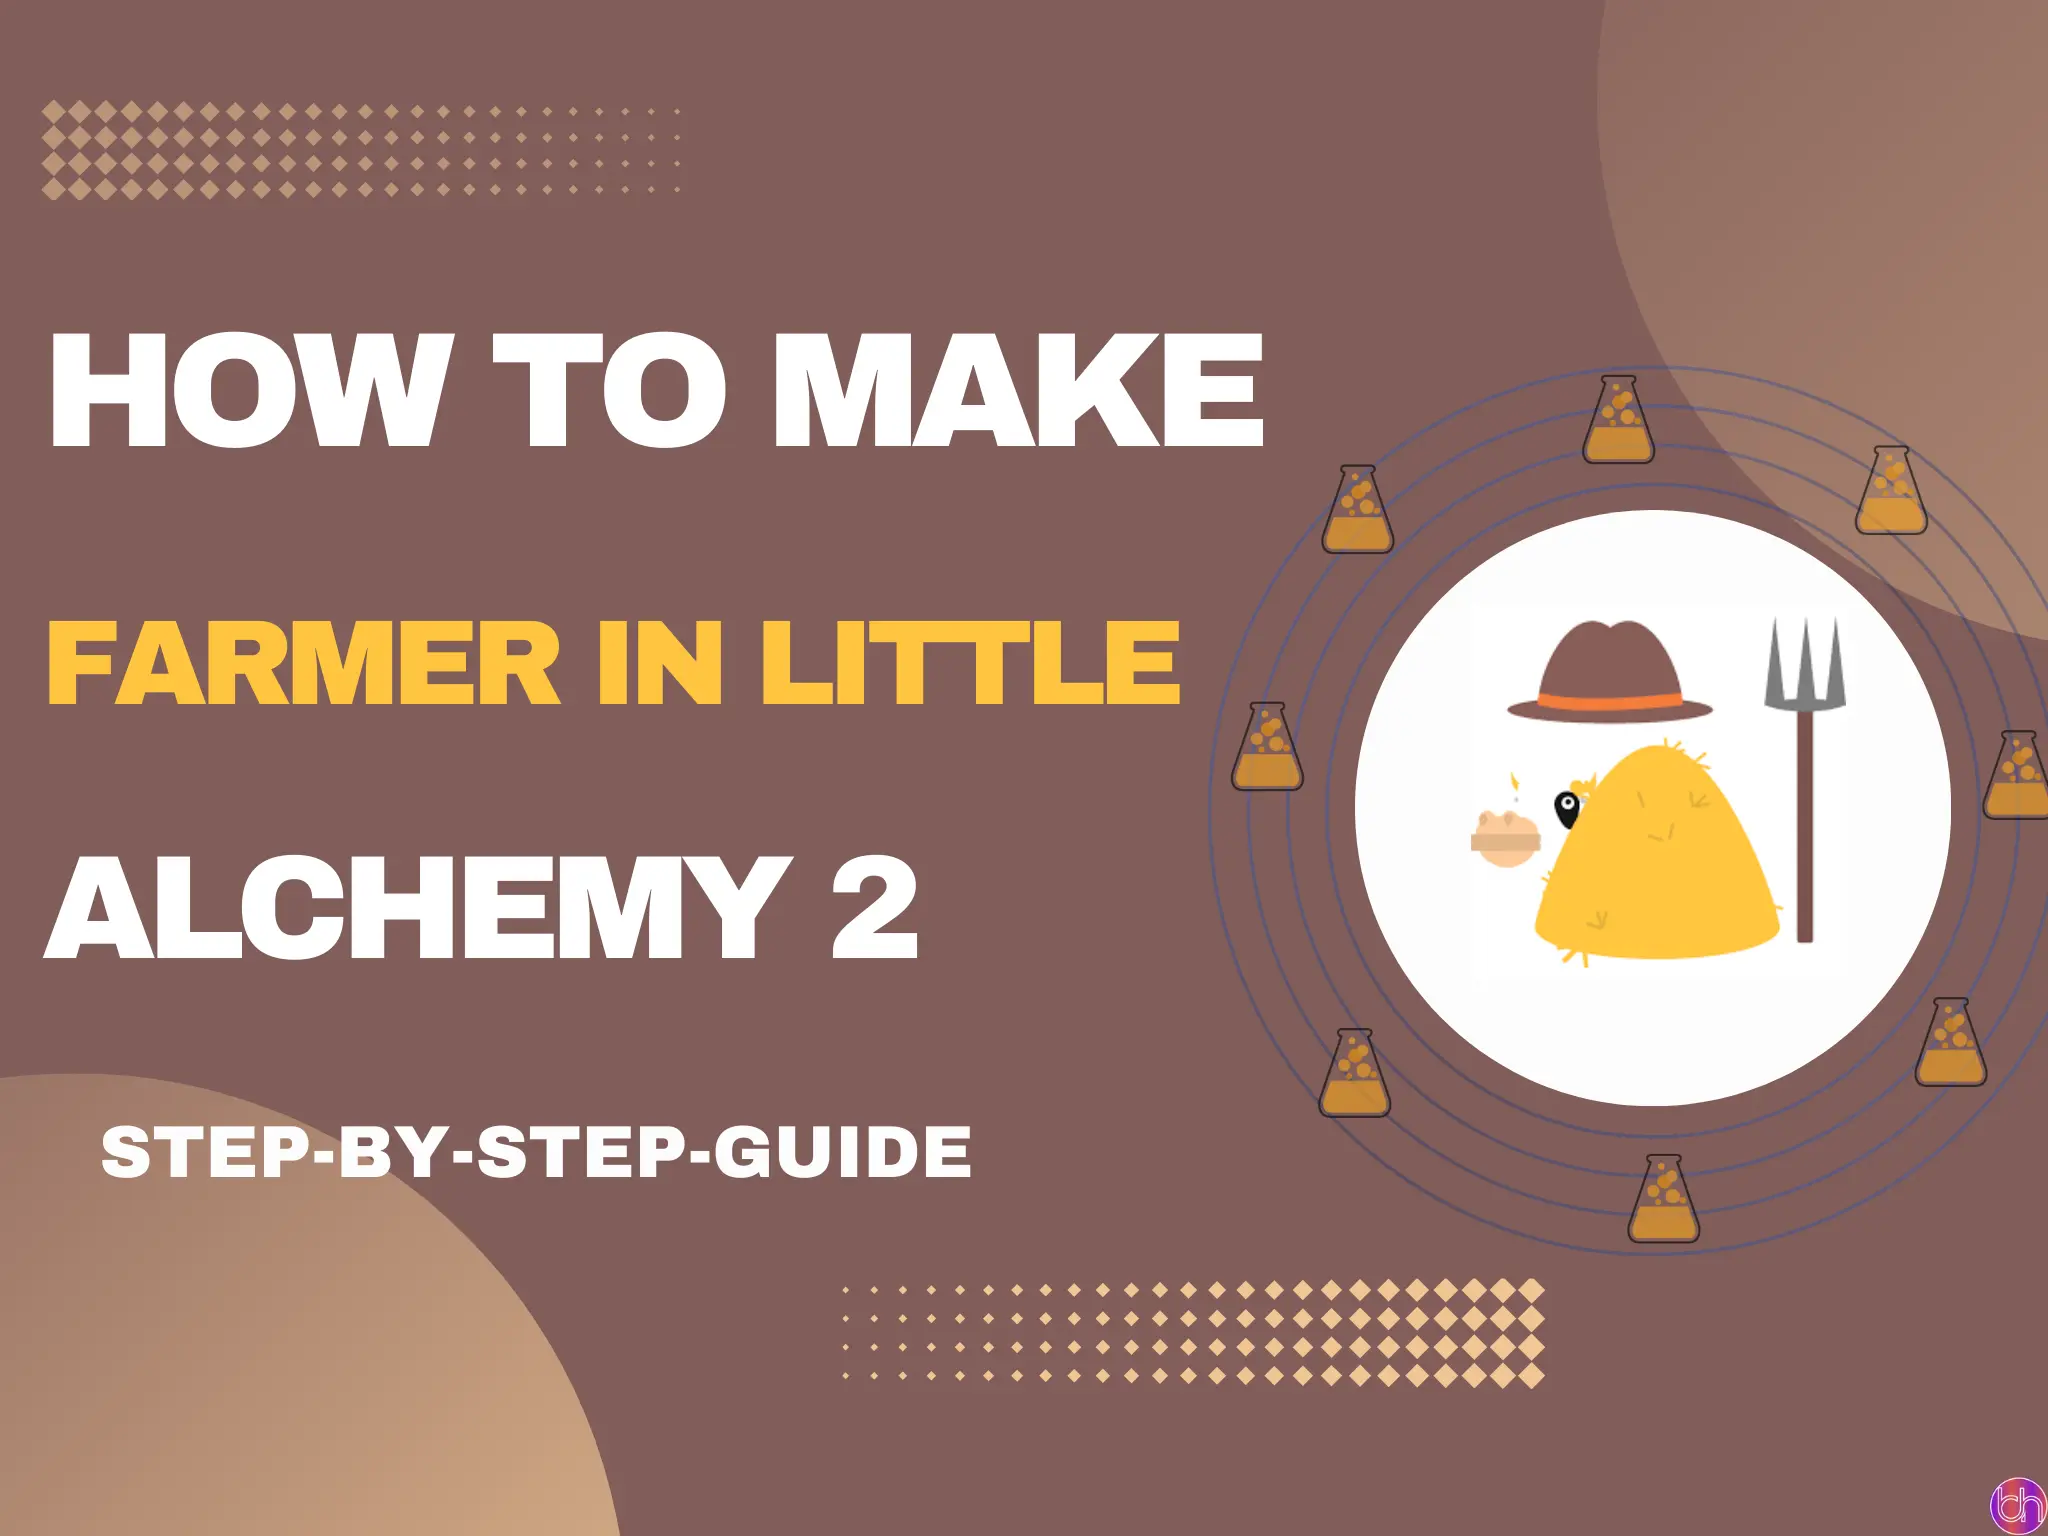 How to make Farmer in little alchemy